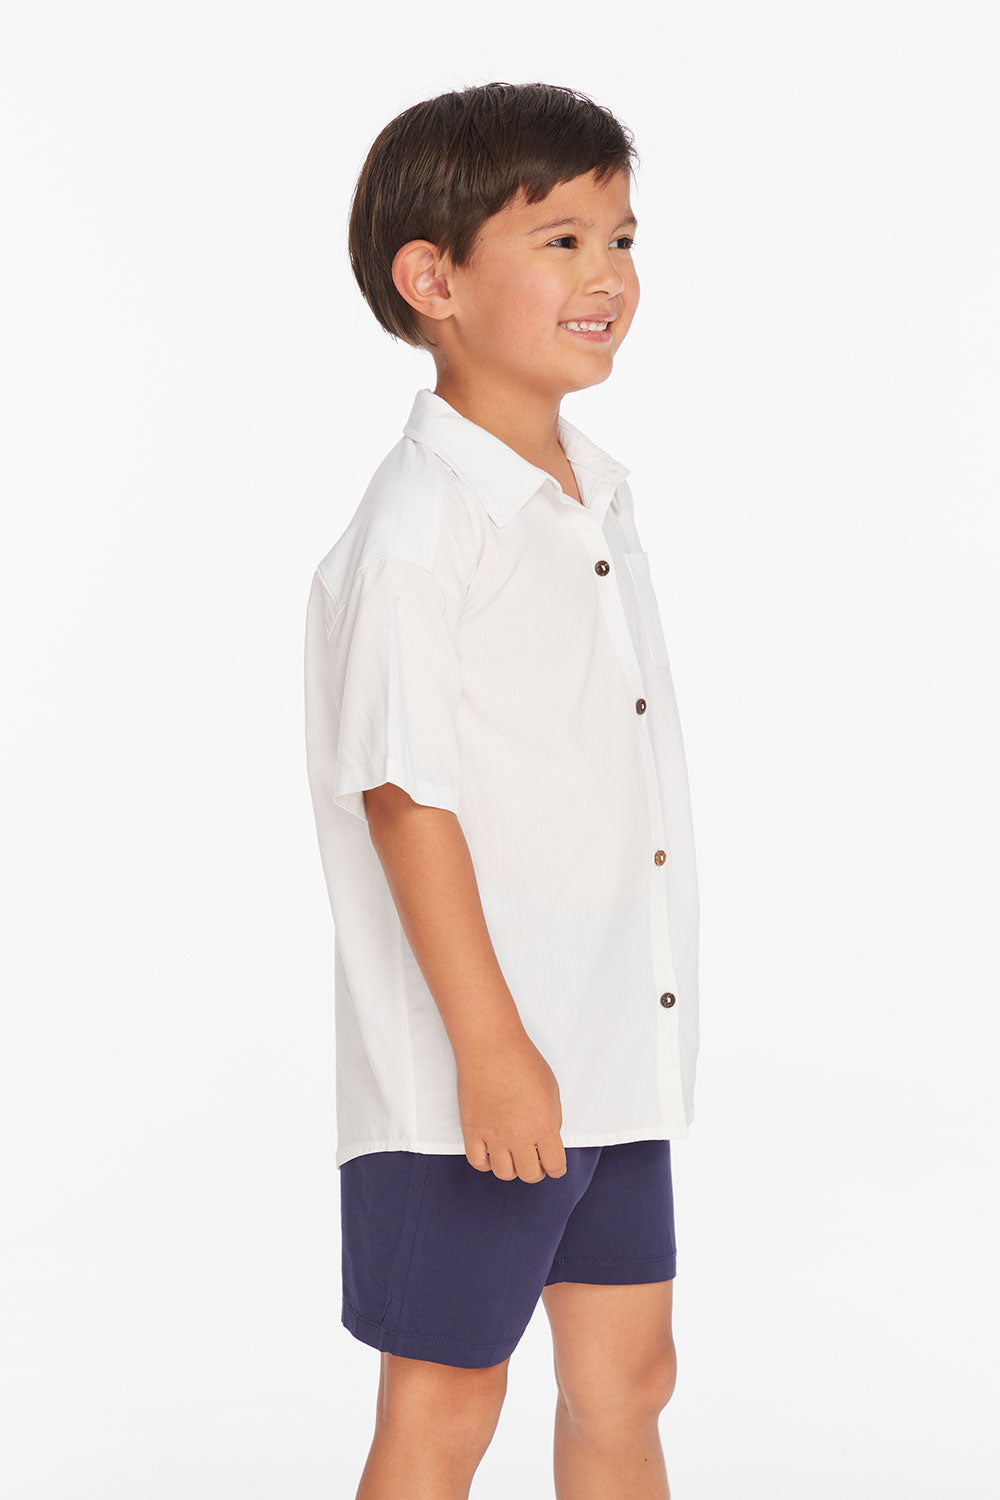 Collared White Button Down Boys Shirt Boys chaserbrand